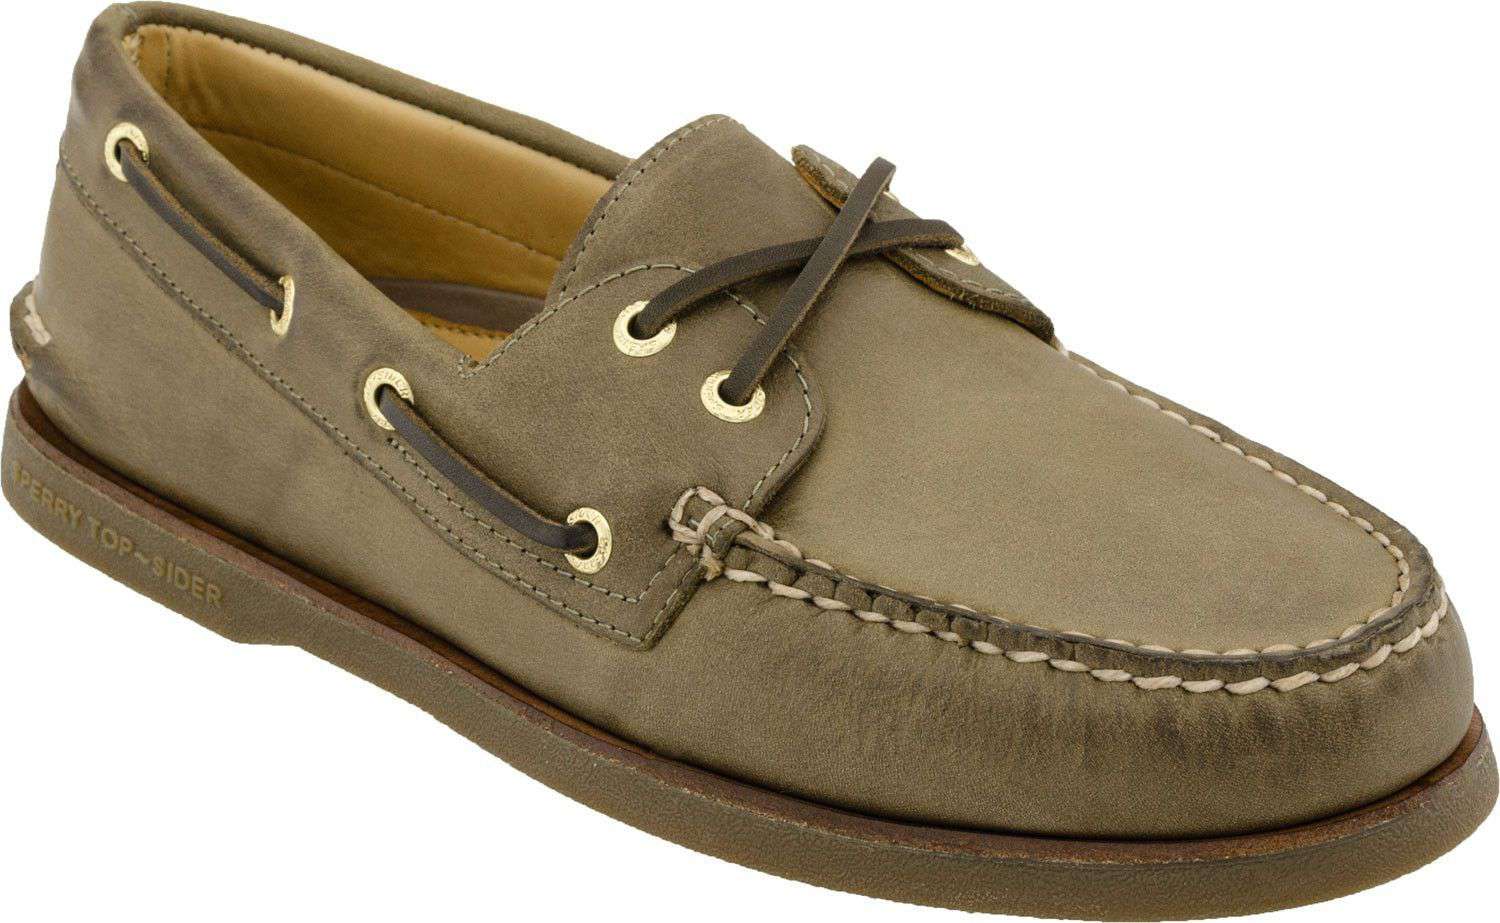 Men's Gold Cup A/O 2 Eye Boat Shoe in Dark Tan by Sperry - Country Club Prep